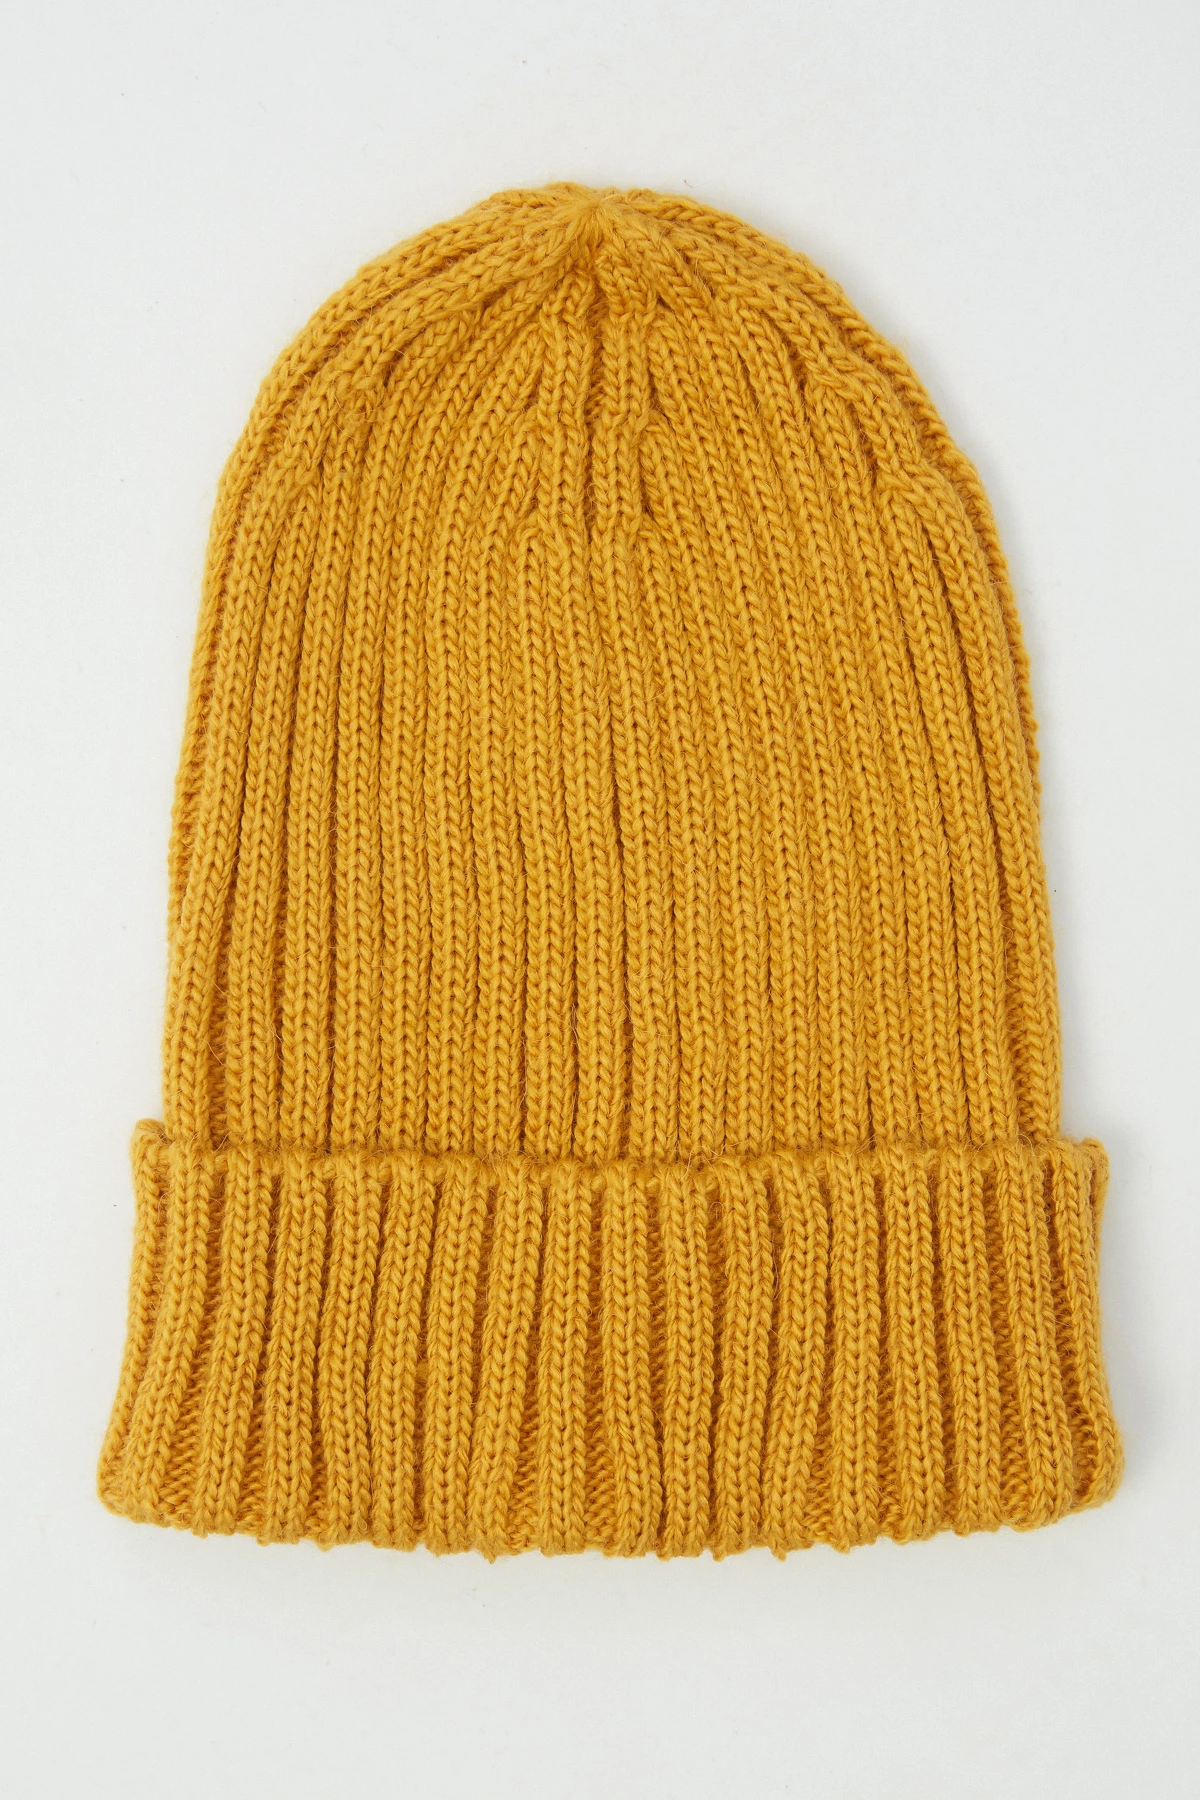 Mustartd yellow knitted wool beanie hat with a lapel, photo 2